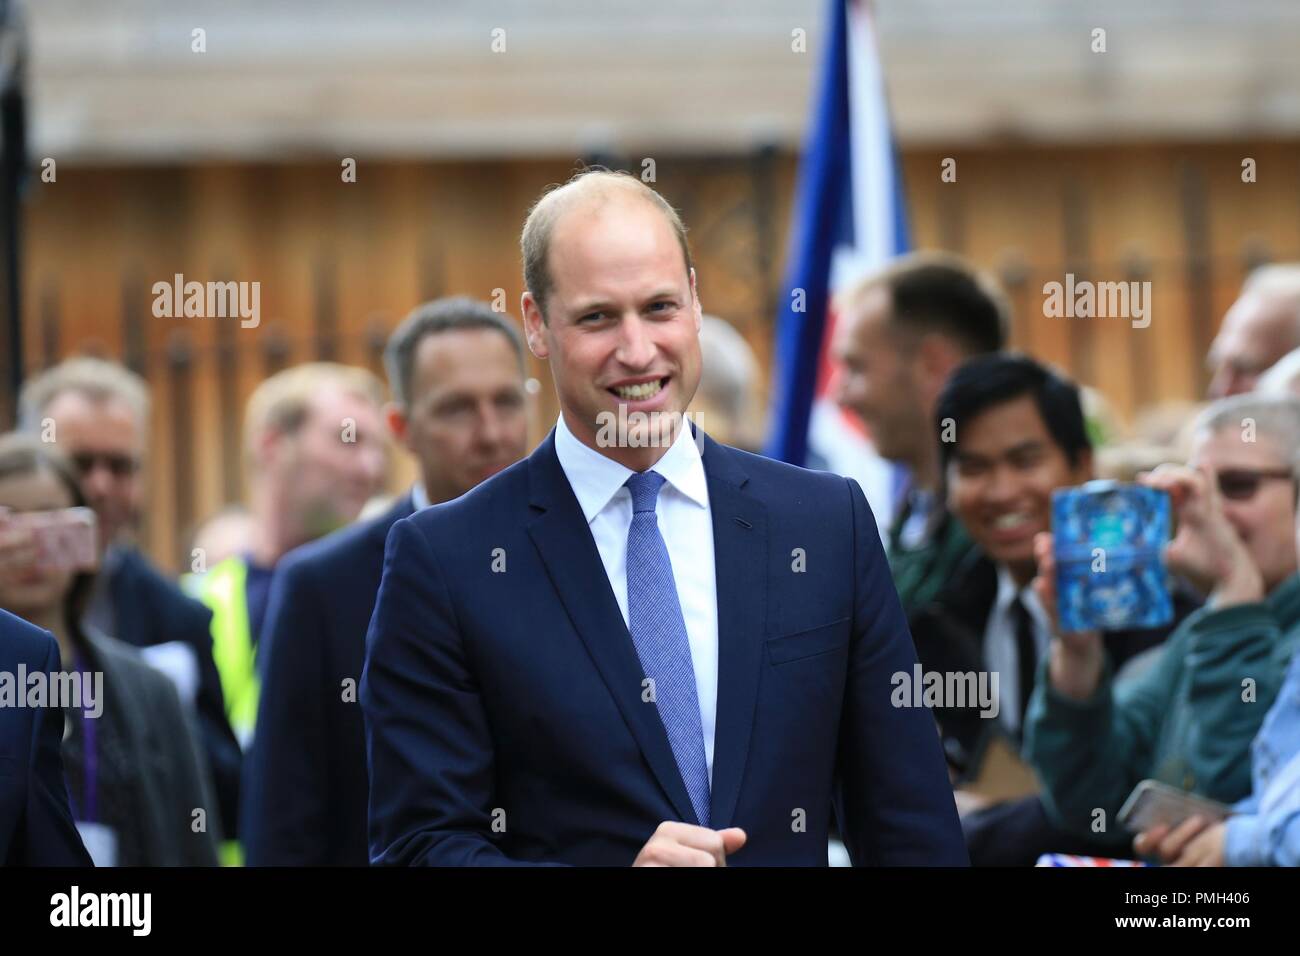 Stourbridge, West Midlands, UK. 18th September, 2018. The Duke of Cambridge, Prince William, meets admirers as visits Stourbridge to unveil a new statue of Frank Foley, often called the 'British Schindler'. Major Foley was an undercover British spy based in Berlin where he provided documents to help 10,000 Jewish men, women and children escape before the Second World War. Peter Lopeman/Alamy Live News Stock Photo